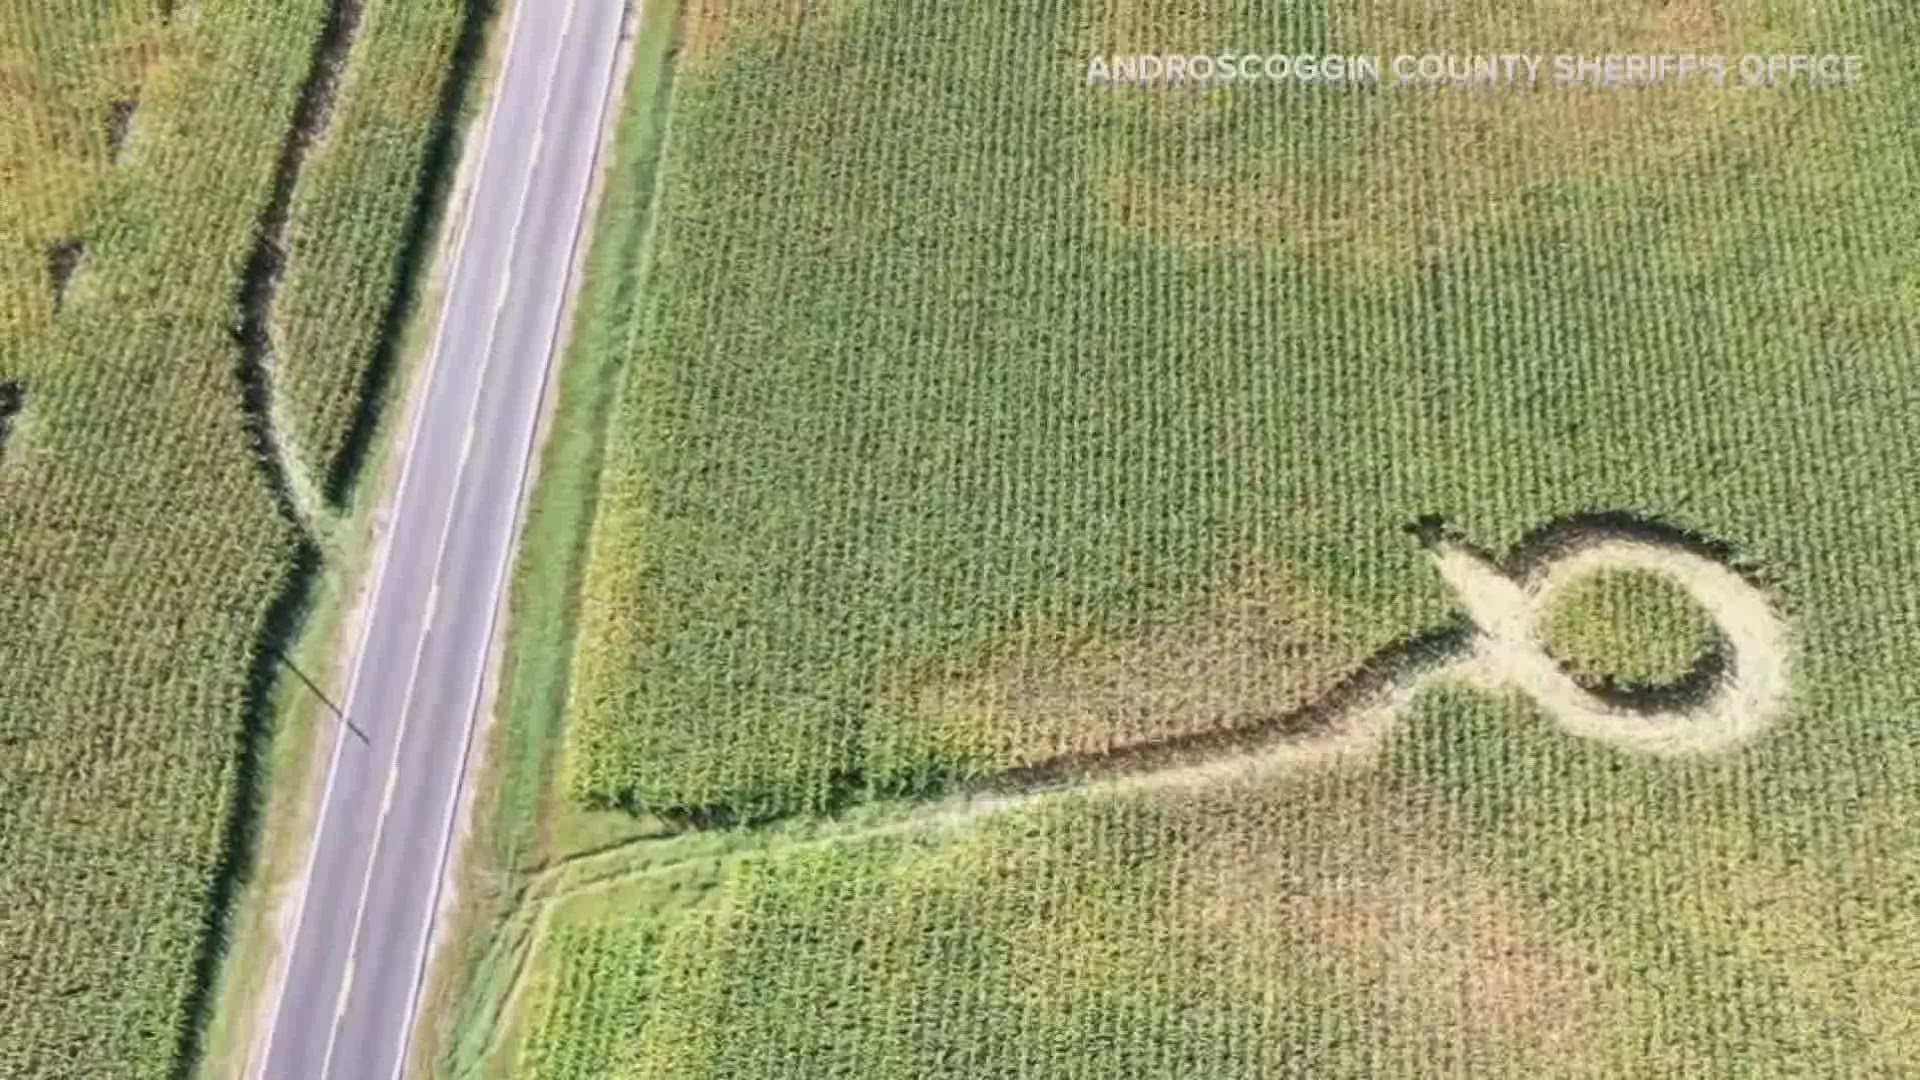 A cornfield was completely destroyed after someone drove thought it late Friday night.